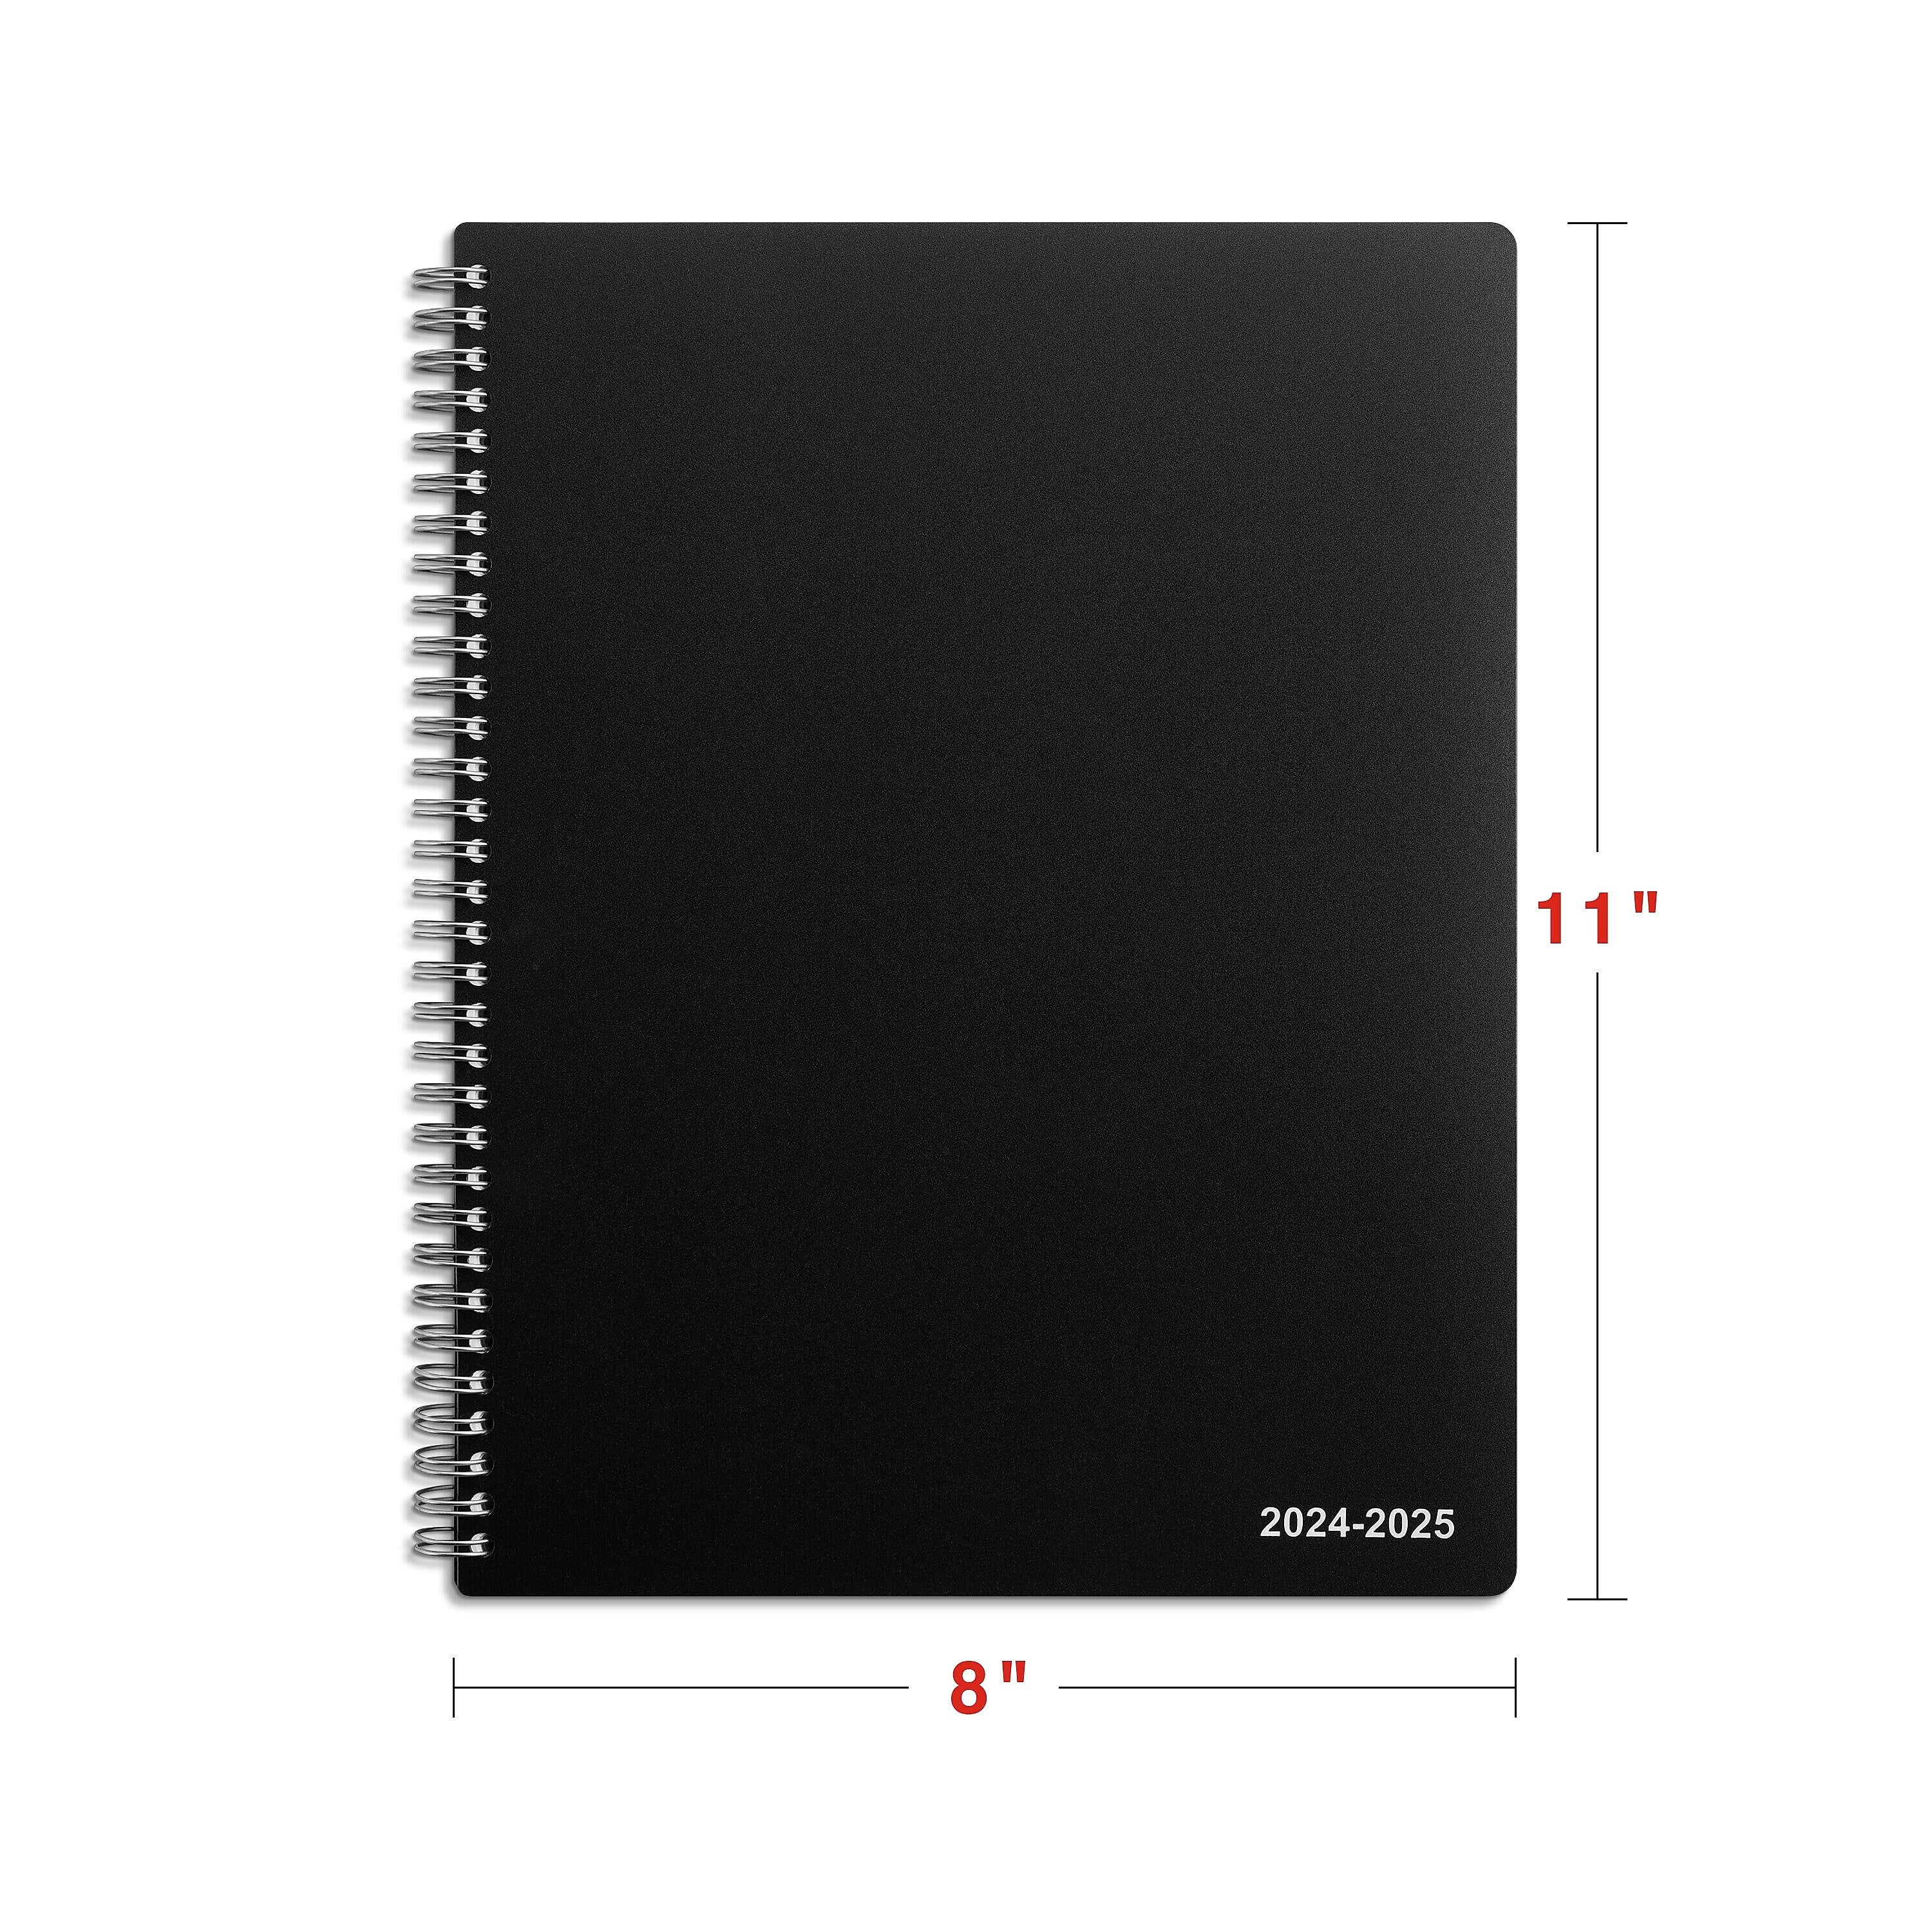 2024-2025 Staples 8" x 11" Academic Weekly & Monthly Appointment Book, Plastic Cover, Black